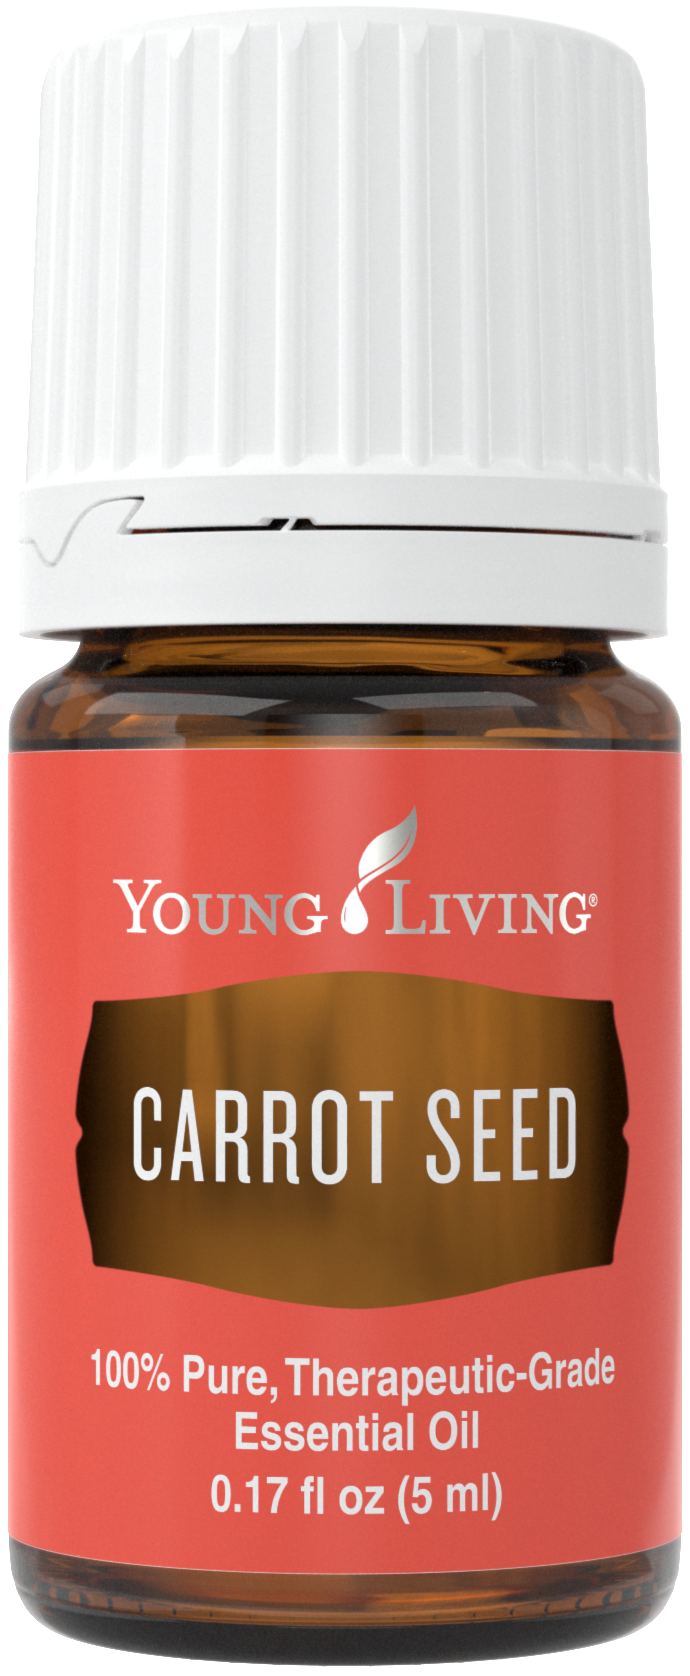 Carrot Seed 5ml Silo.png